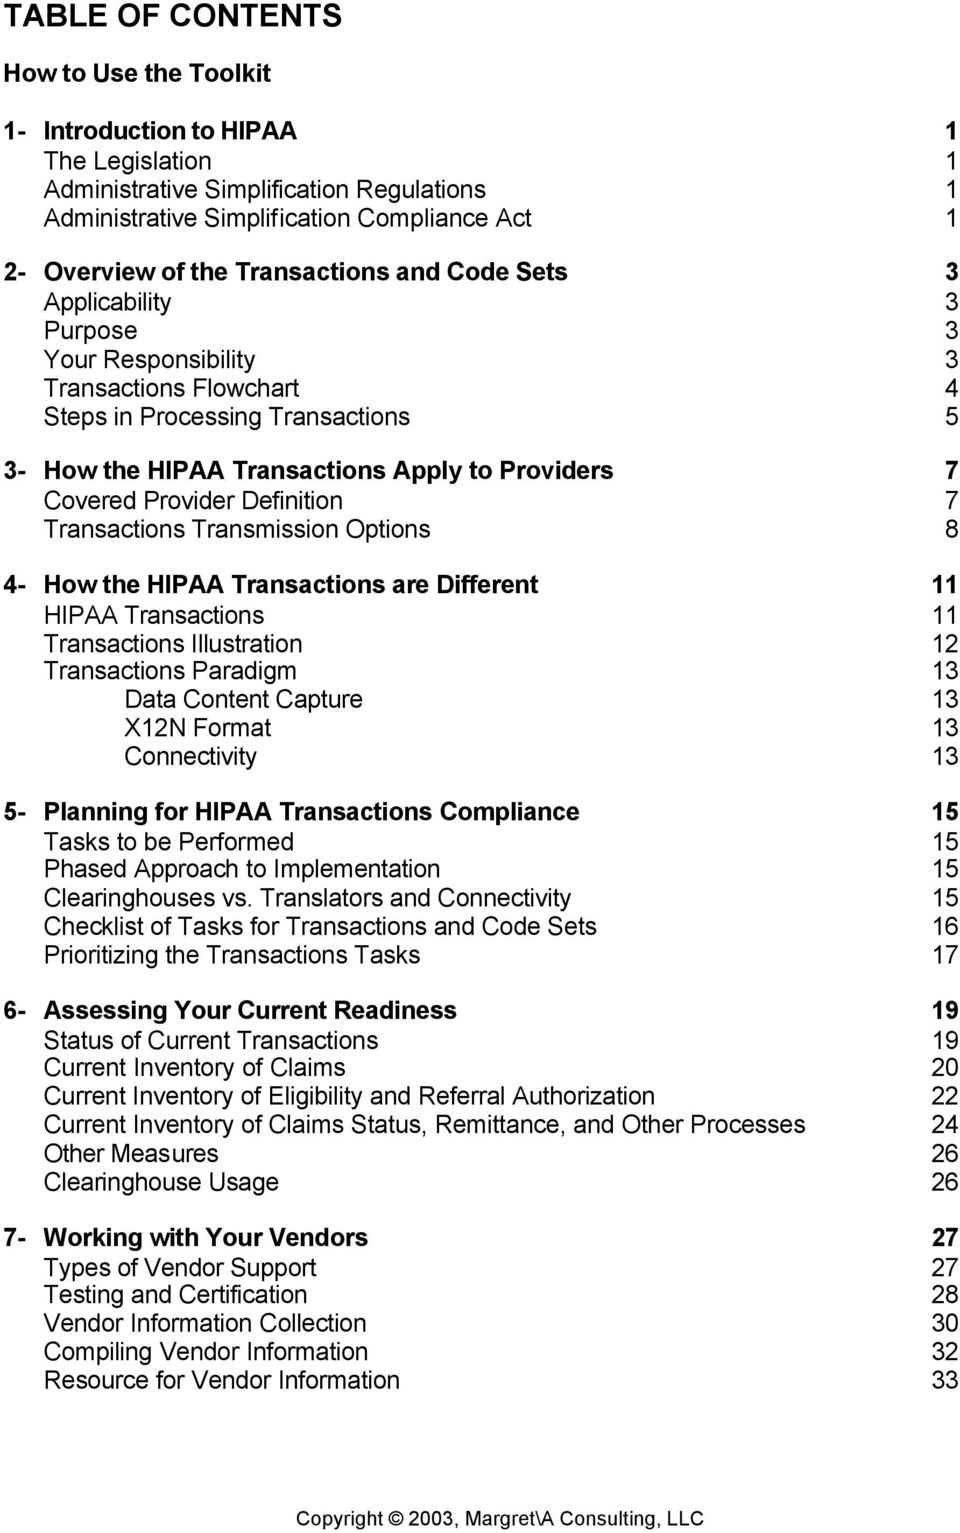 Provider Definition 7 Transactions Transmission Options 8 4- How the HIPAA Transactions are Different 11 HIPAA Transactions 11 Transactions Illustration 12 Transactions Paradigm 13 Data Content